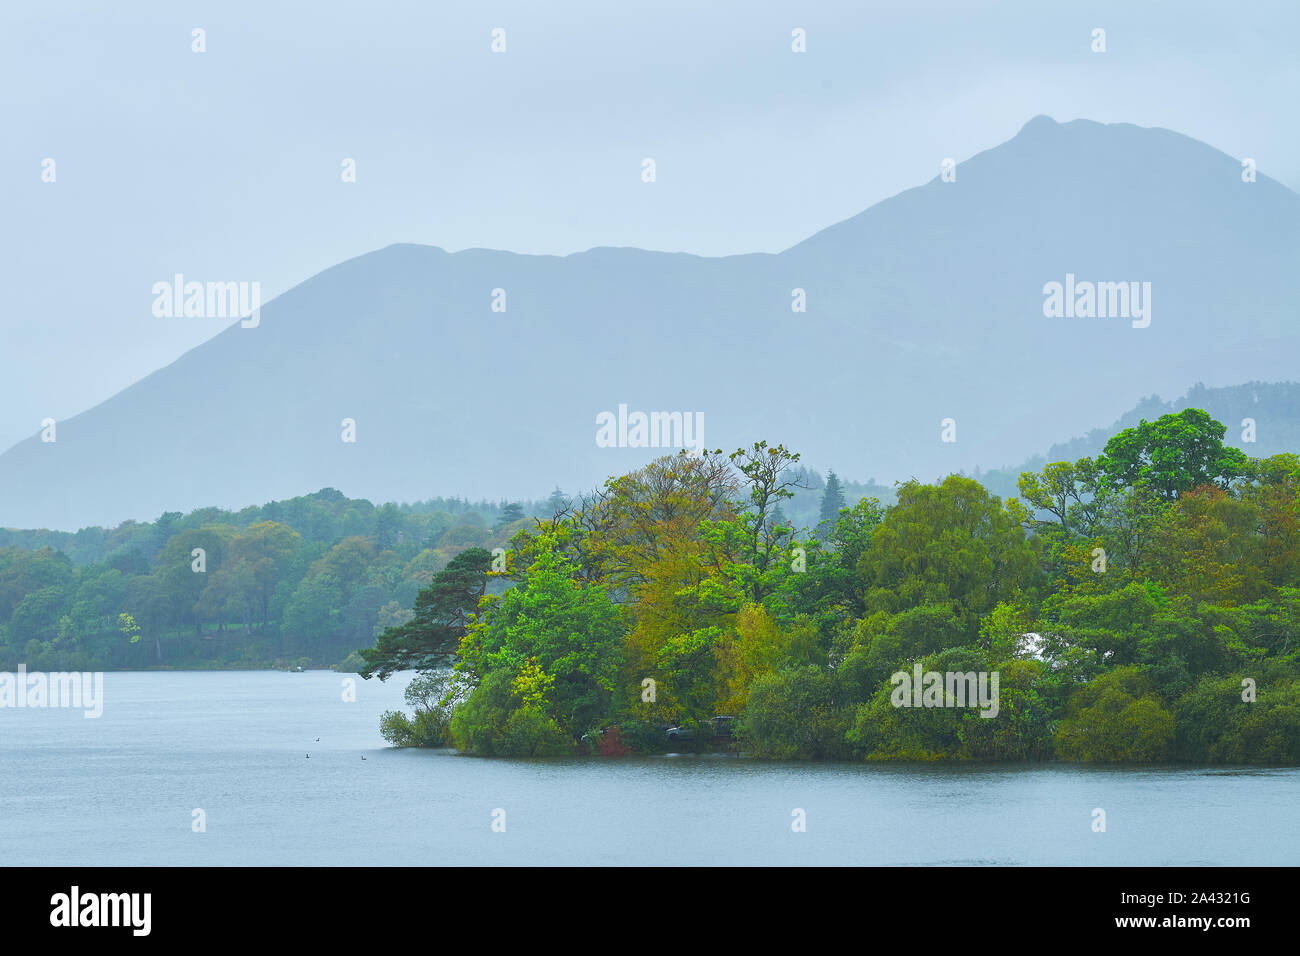 Outline of the ridge on Cat Bells mountain during a cloudy, rainy day at Lake Derwentwater, Lake District national park, Cumbria, England. Stock Photo